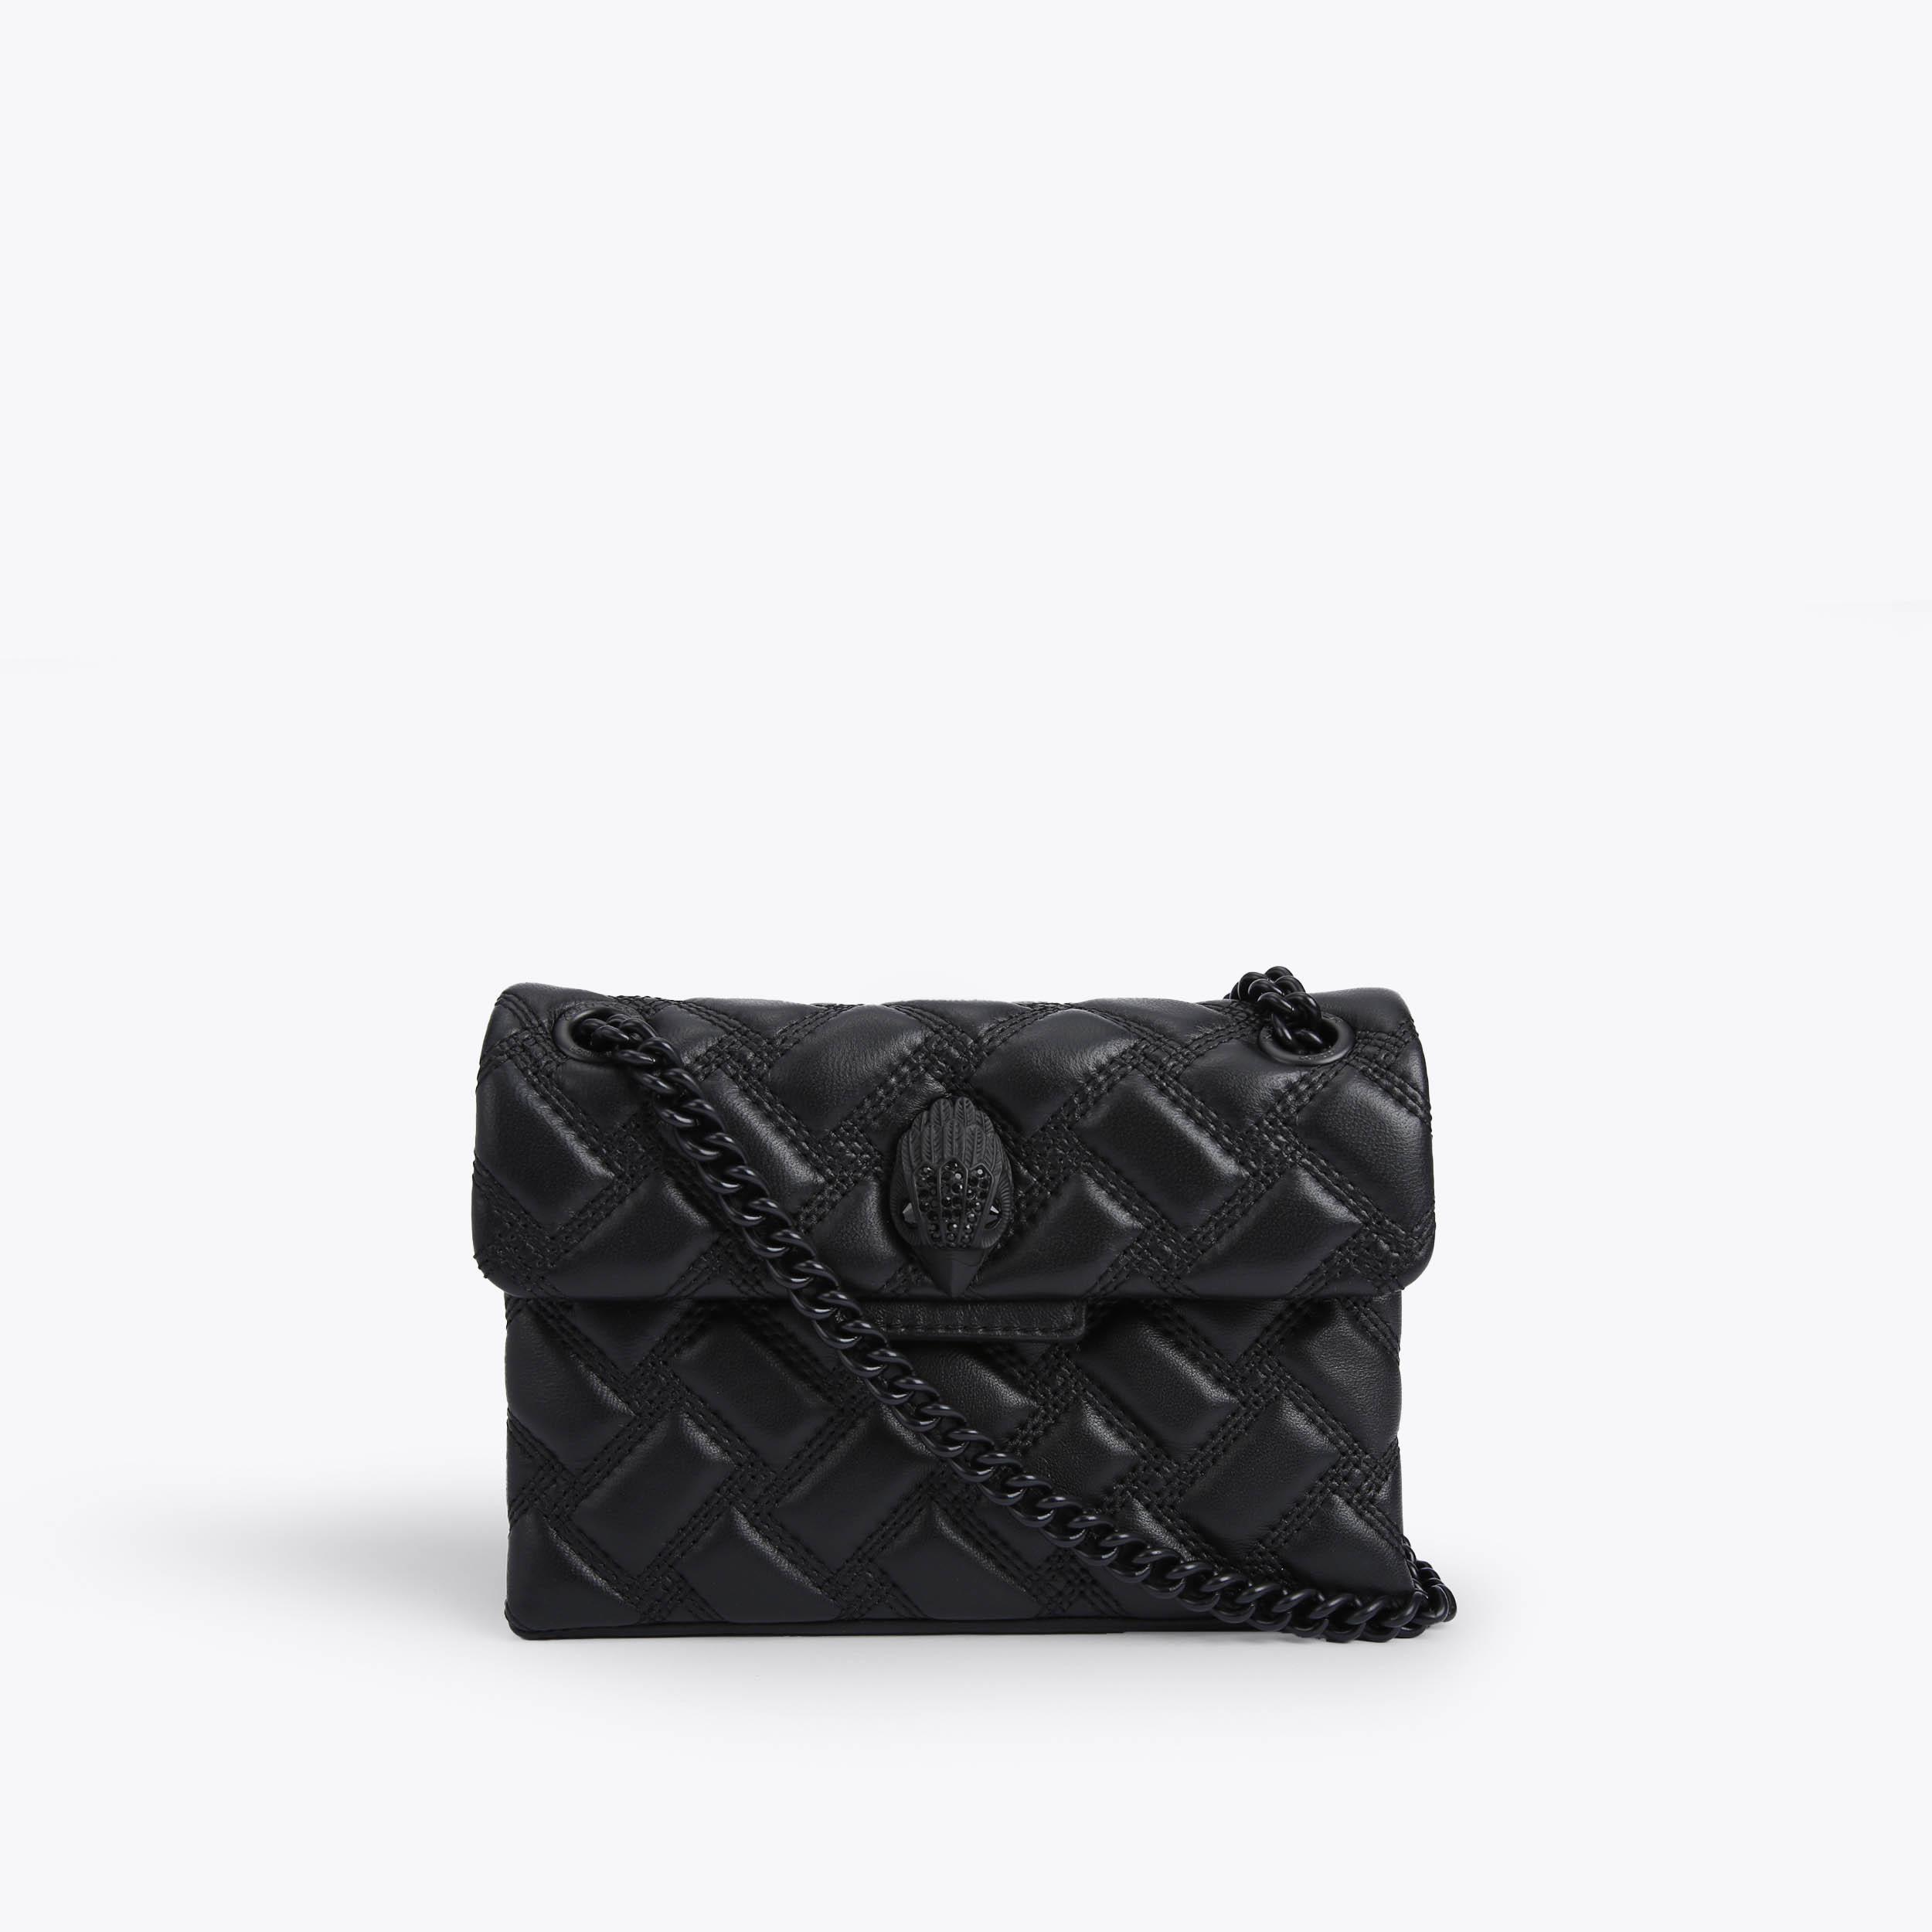 MINI KENSINGTON DRENCH ALL MATTE BLACK Quilted Leather Mini Bag by